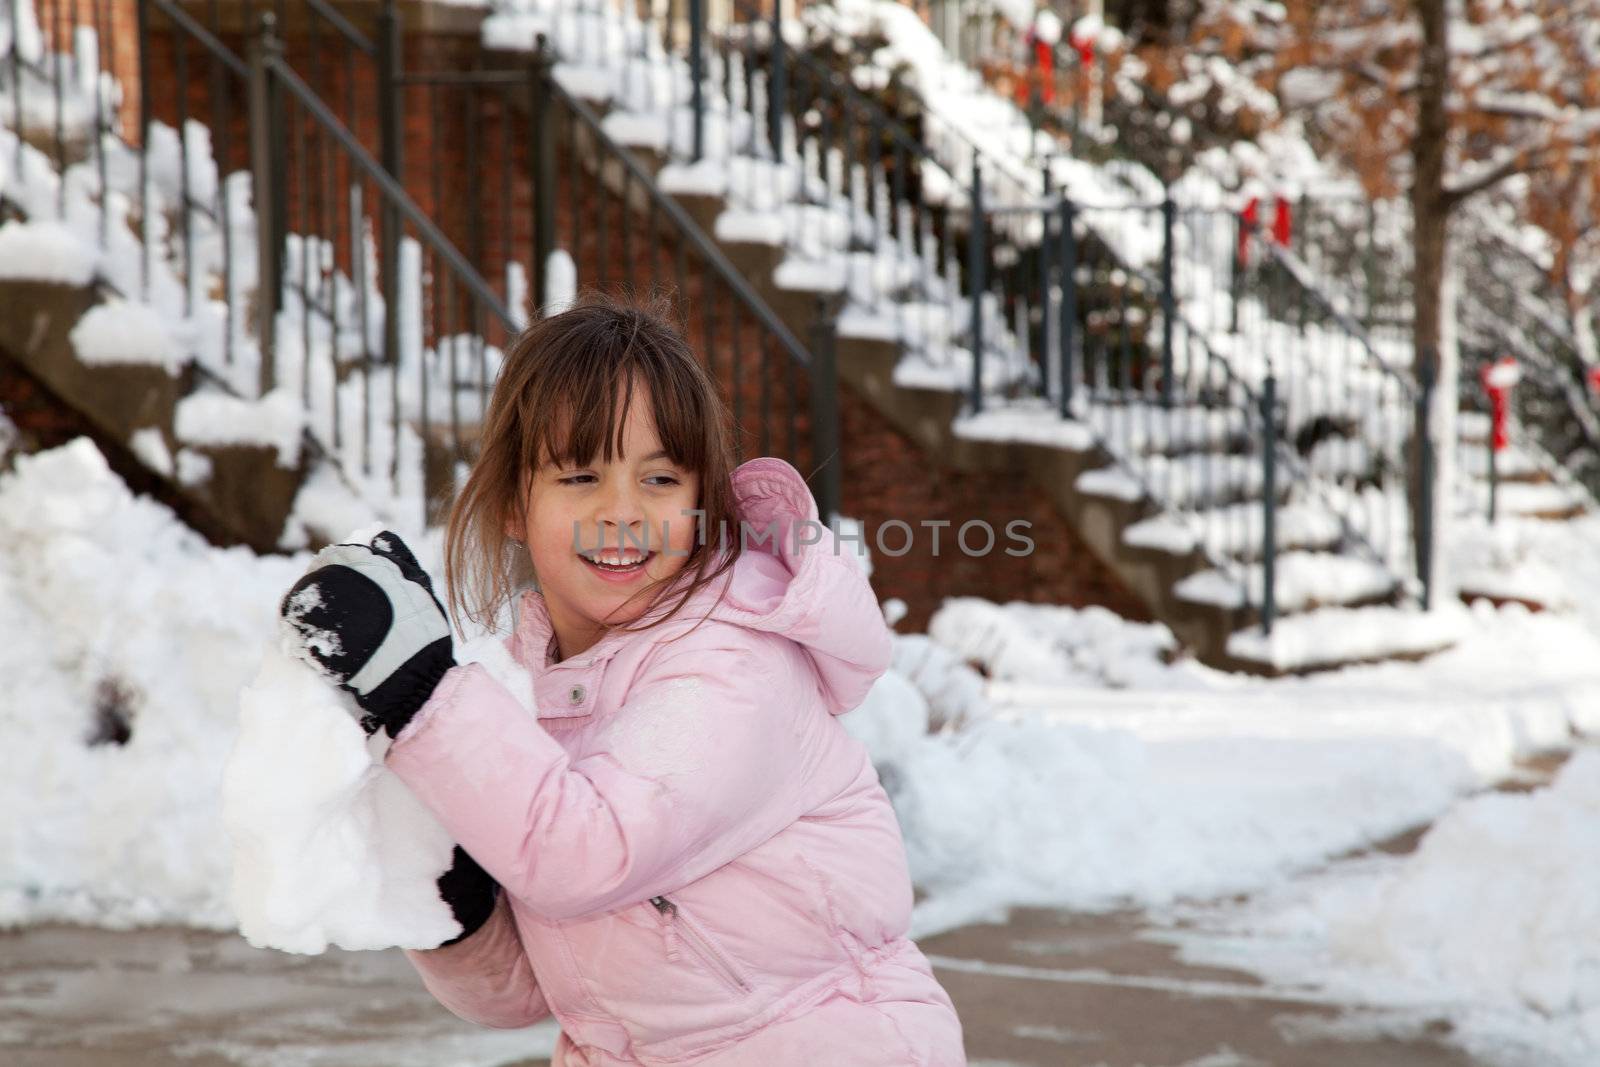 Winter portrait of a smiling little girl playing in the snow throwing a big snow ball.